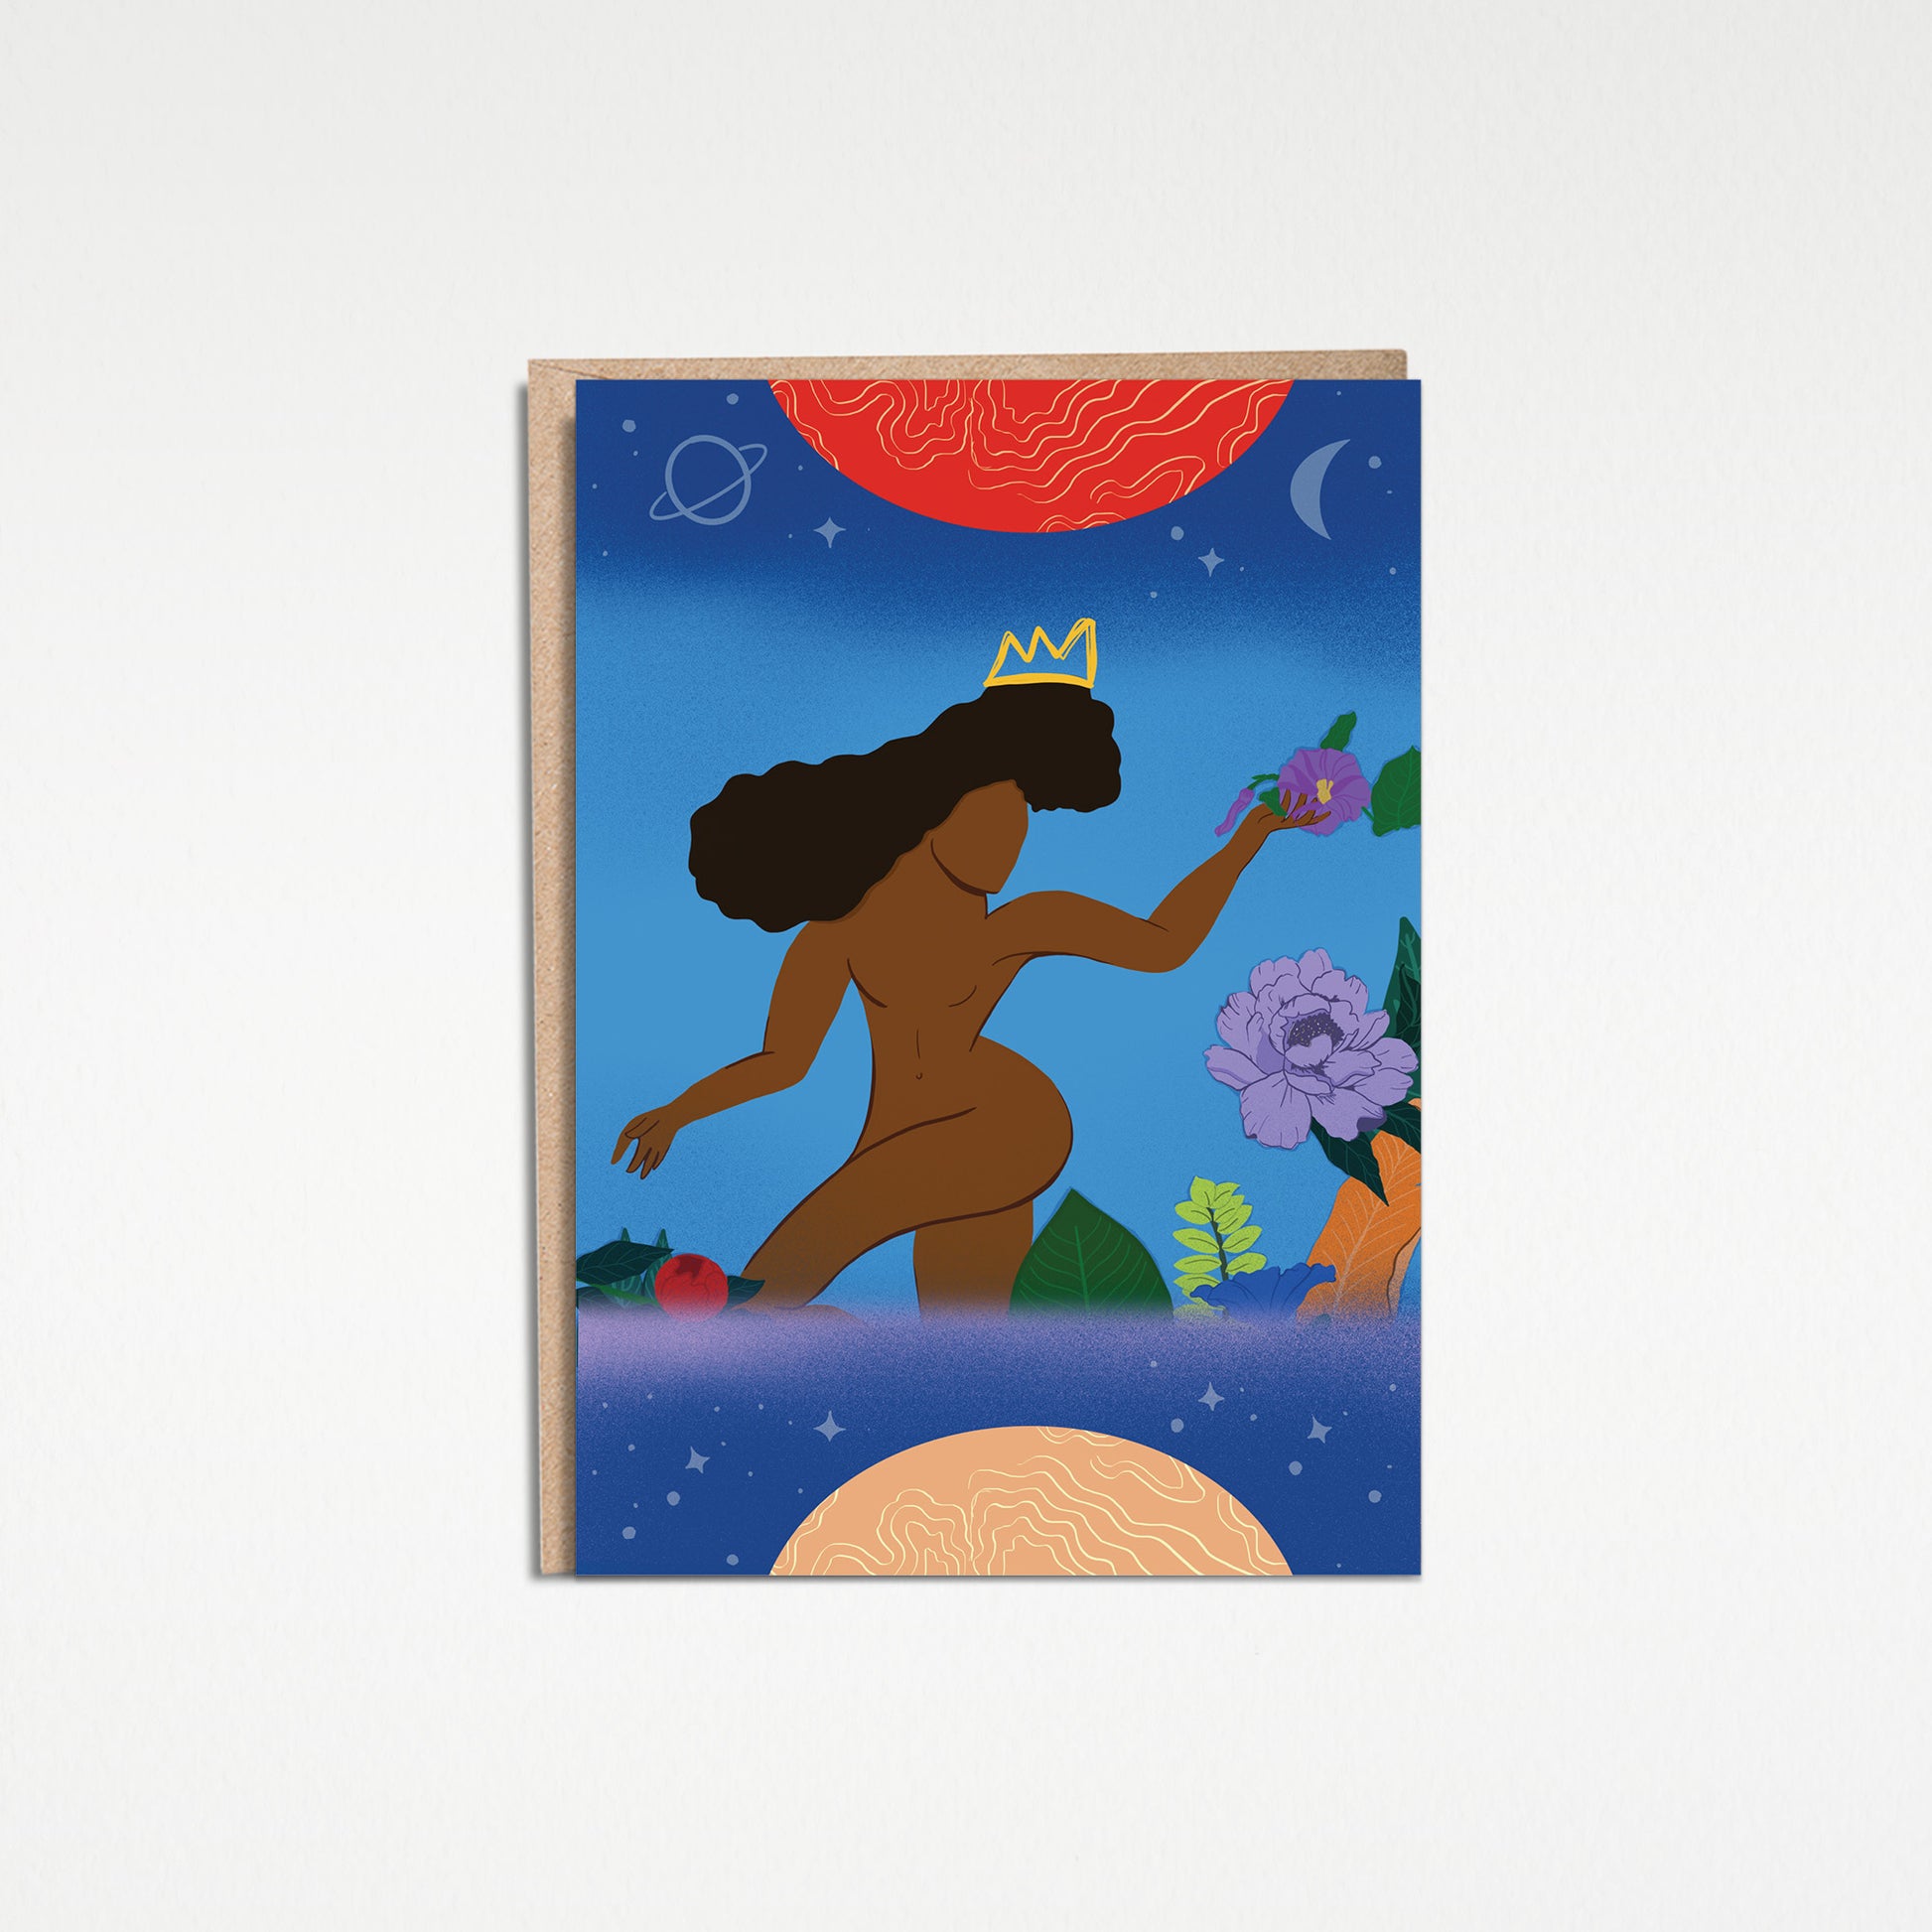 Earth Goddess 5x7” greeting cards from Goods Made By Digitrillnana, Ashley Fletcher. Black Woman Owned. Perfect card to celebrate a Black Woman! Blank inside. Sisterhood cards.